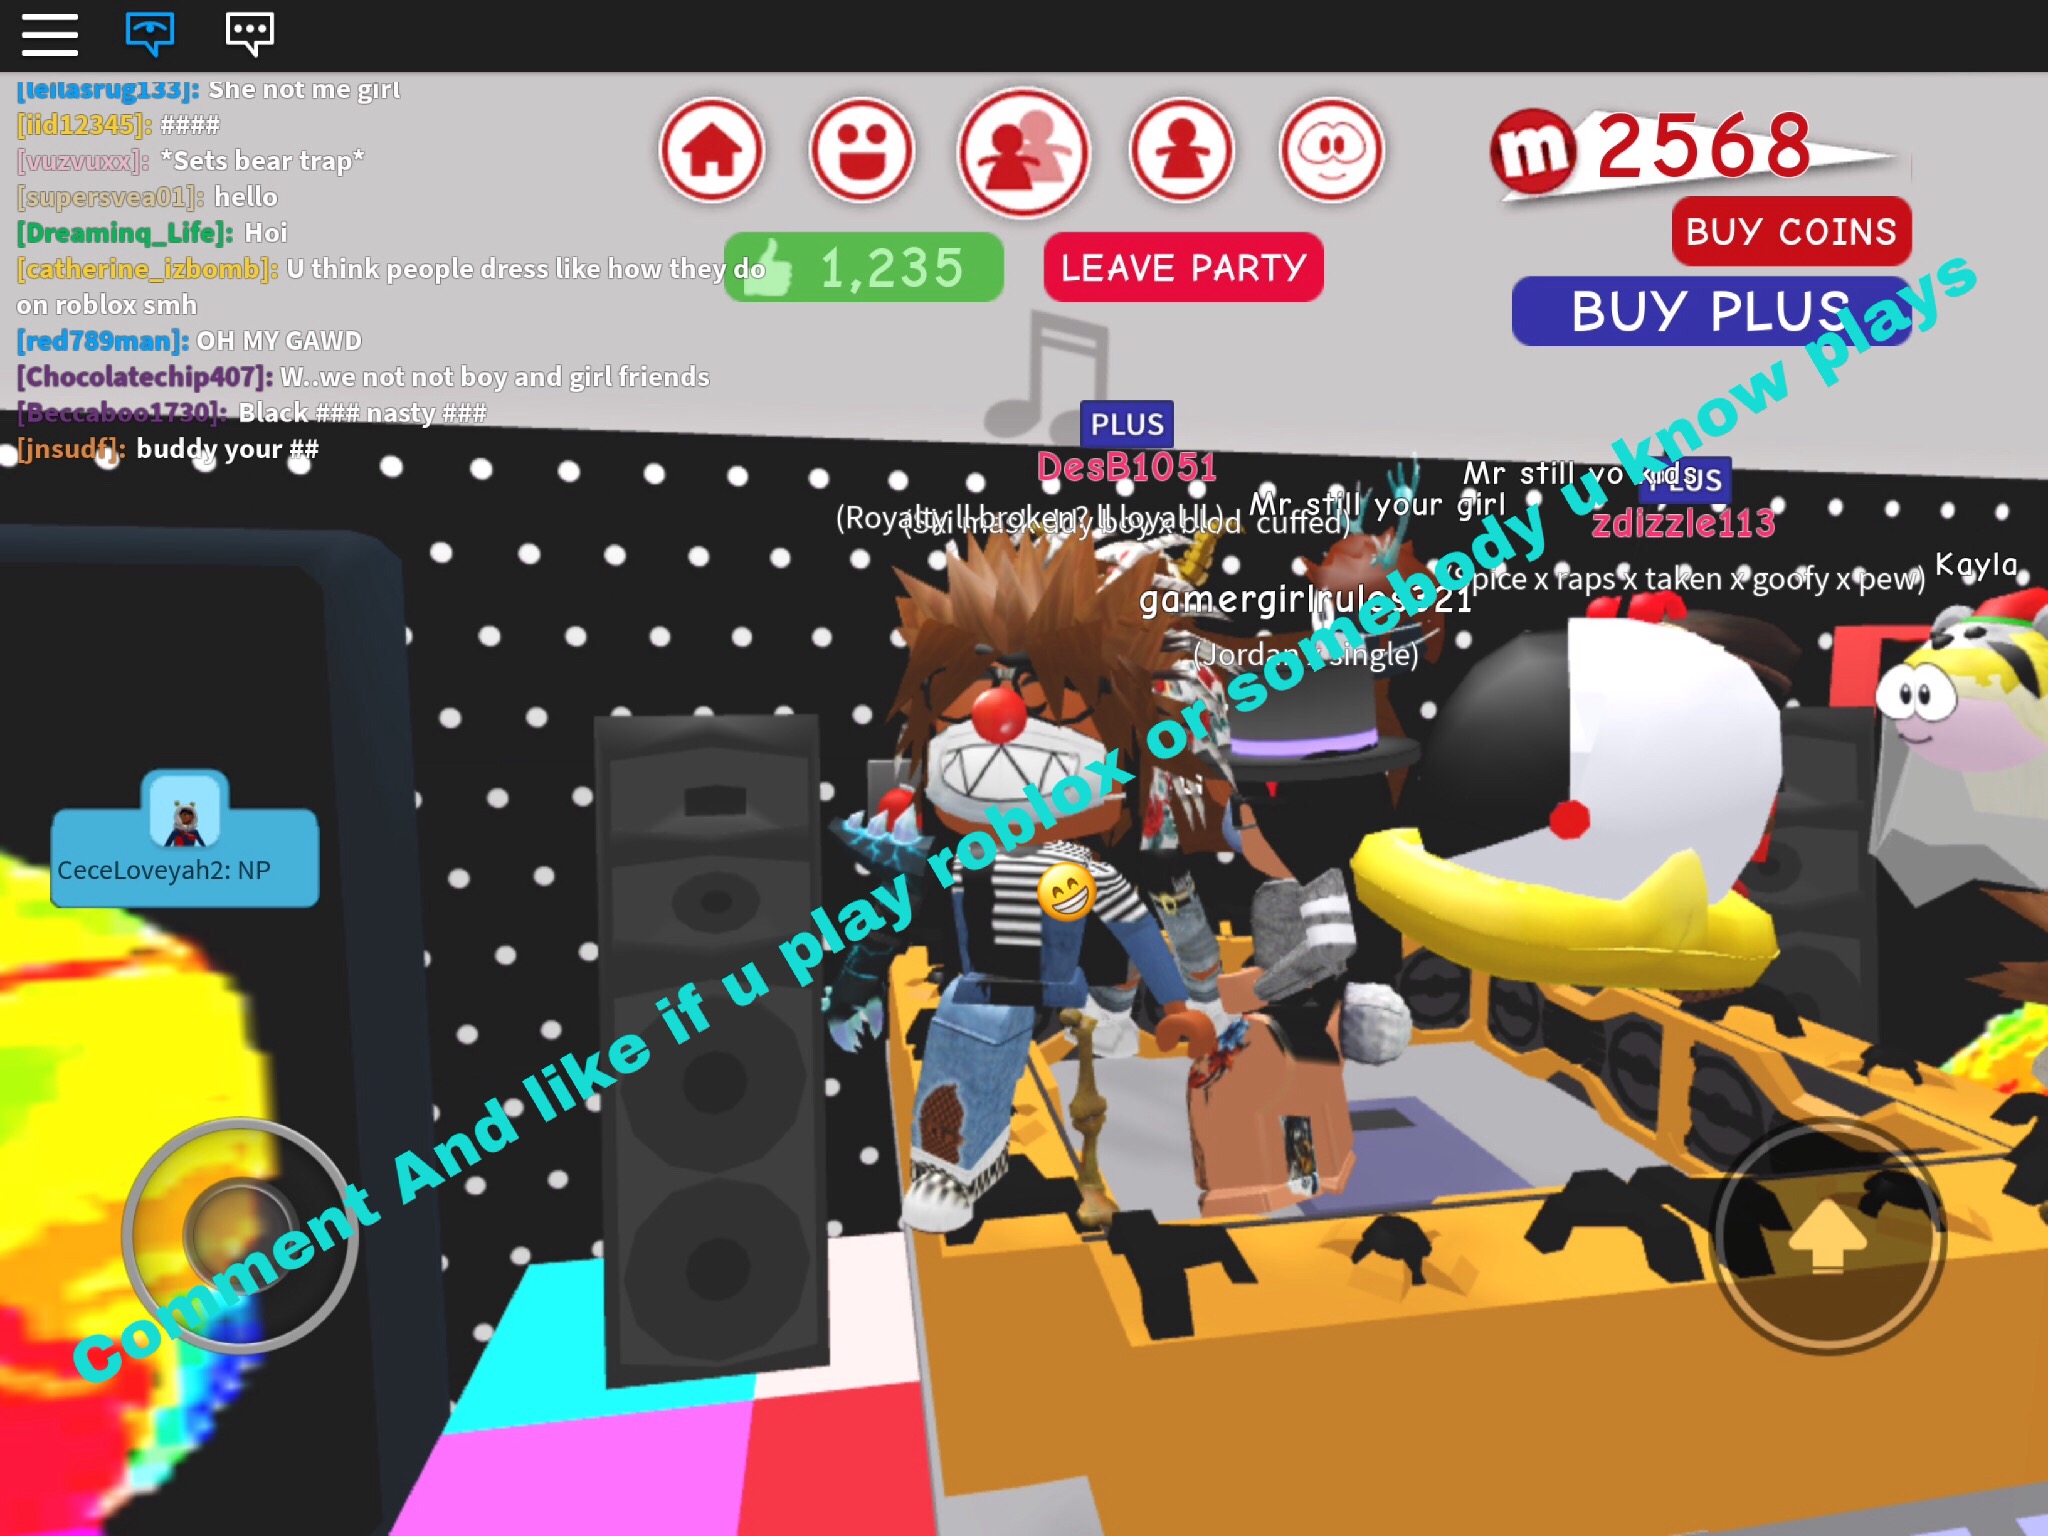 Show Mw Pictures Of Your Roblox Charecterroblox - 